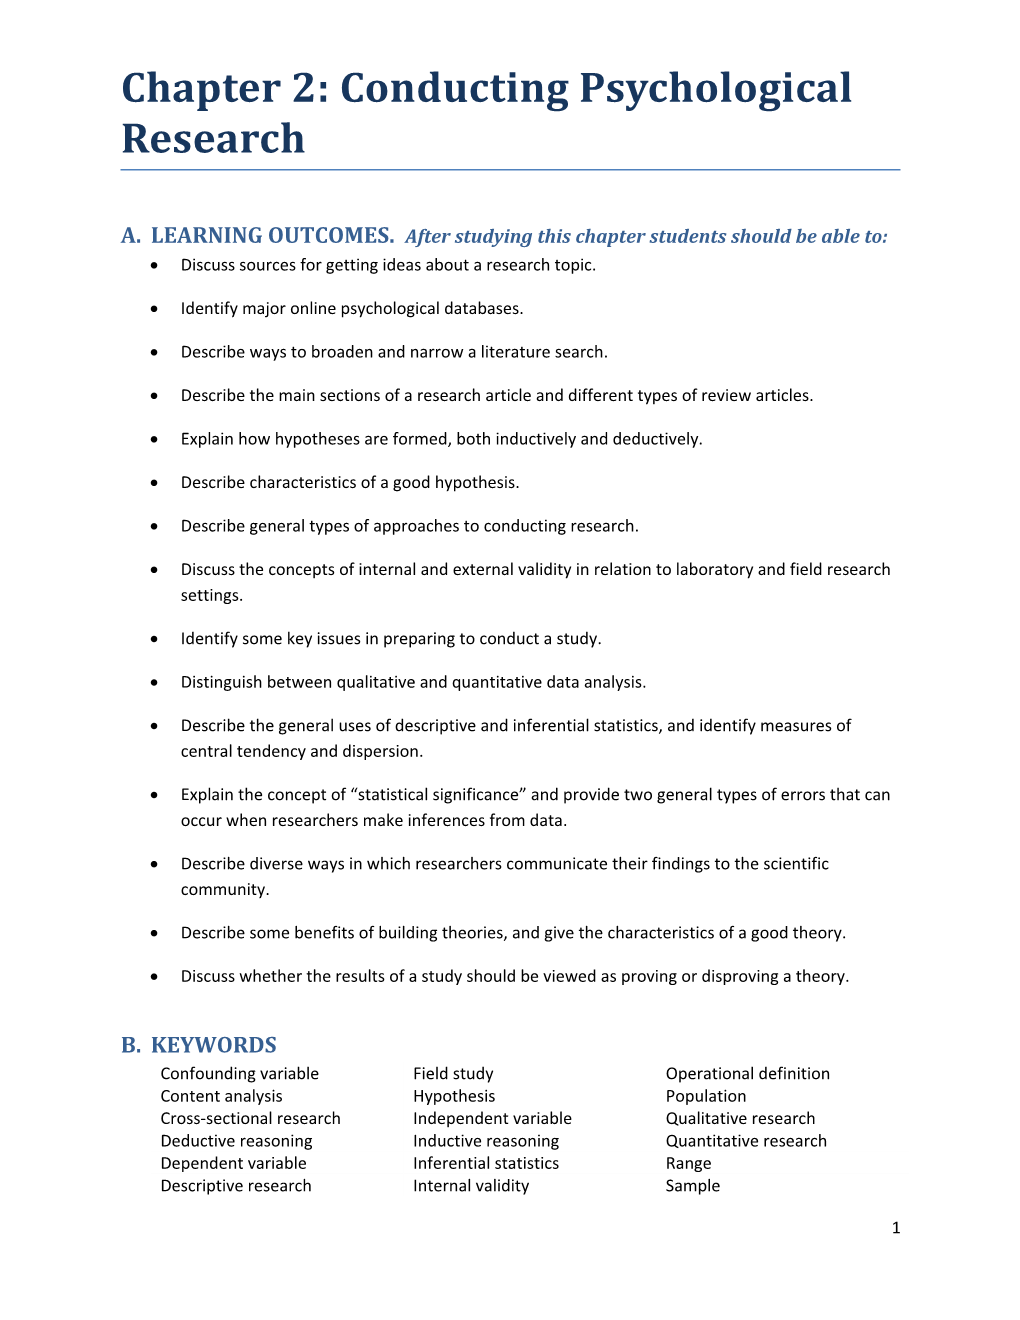 A.LEARNING OUTCOMES. After Studying This Chapter Students Should Be Able To